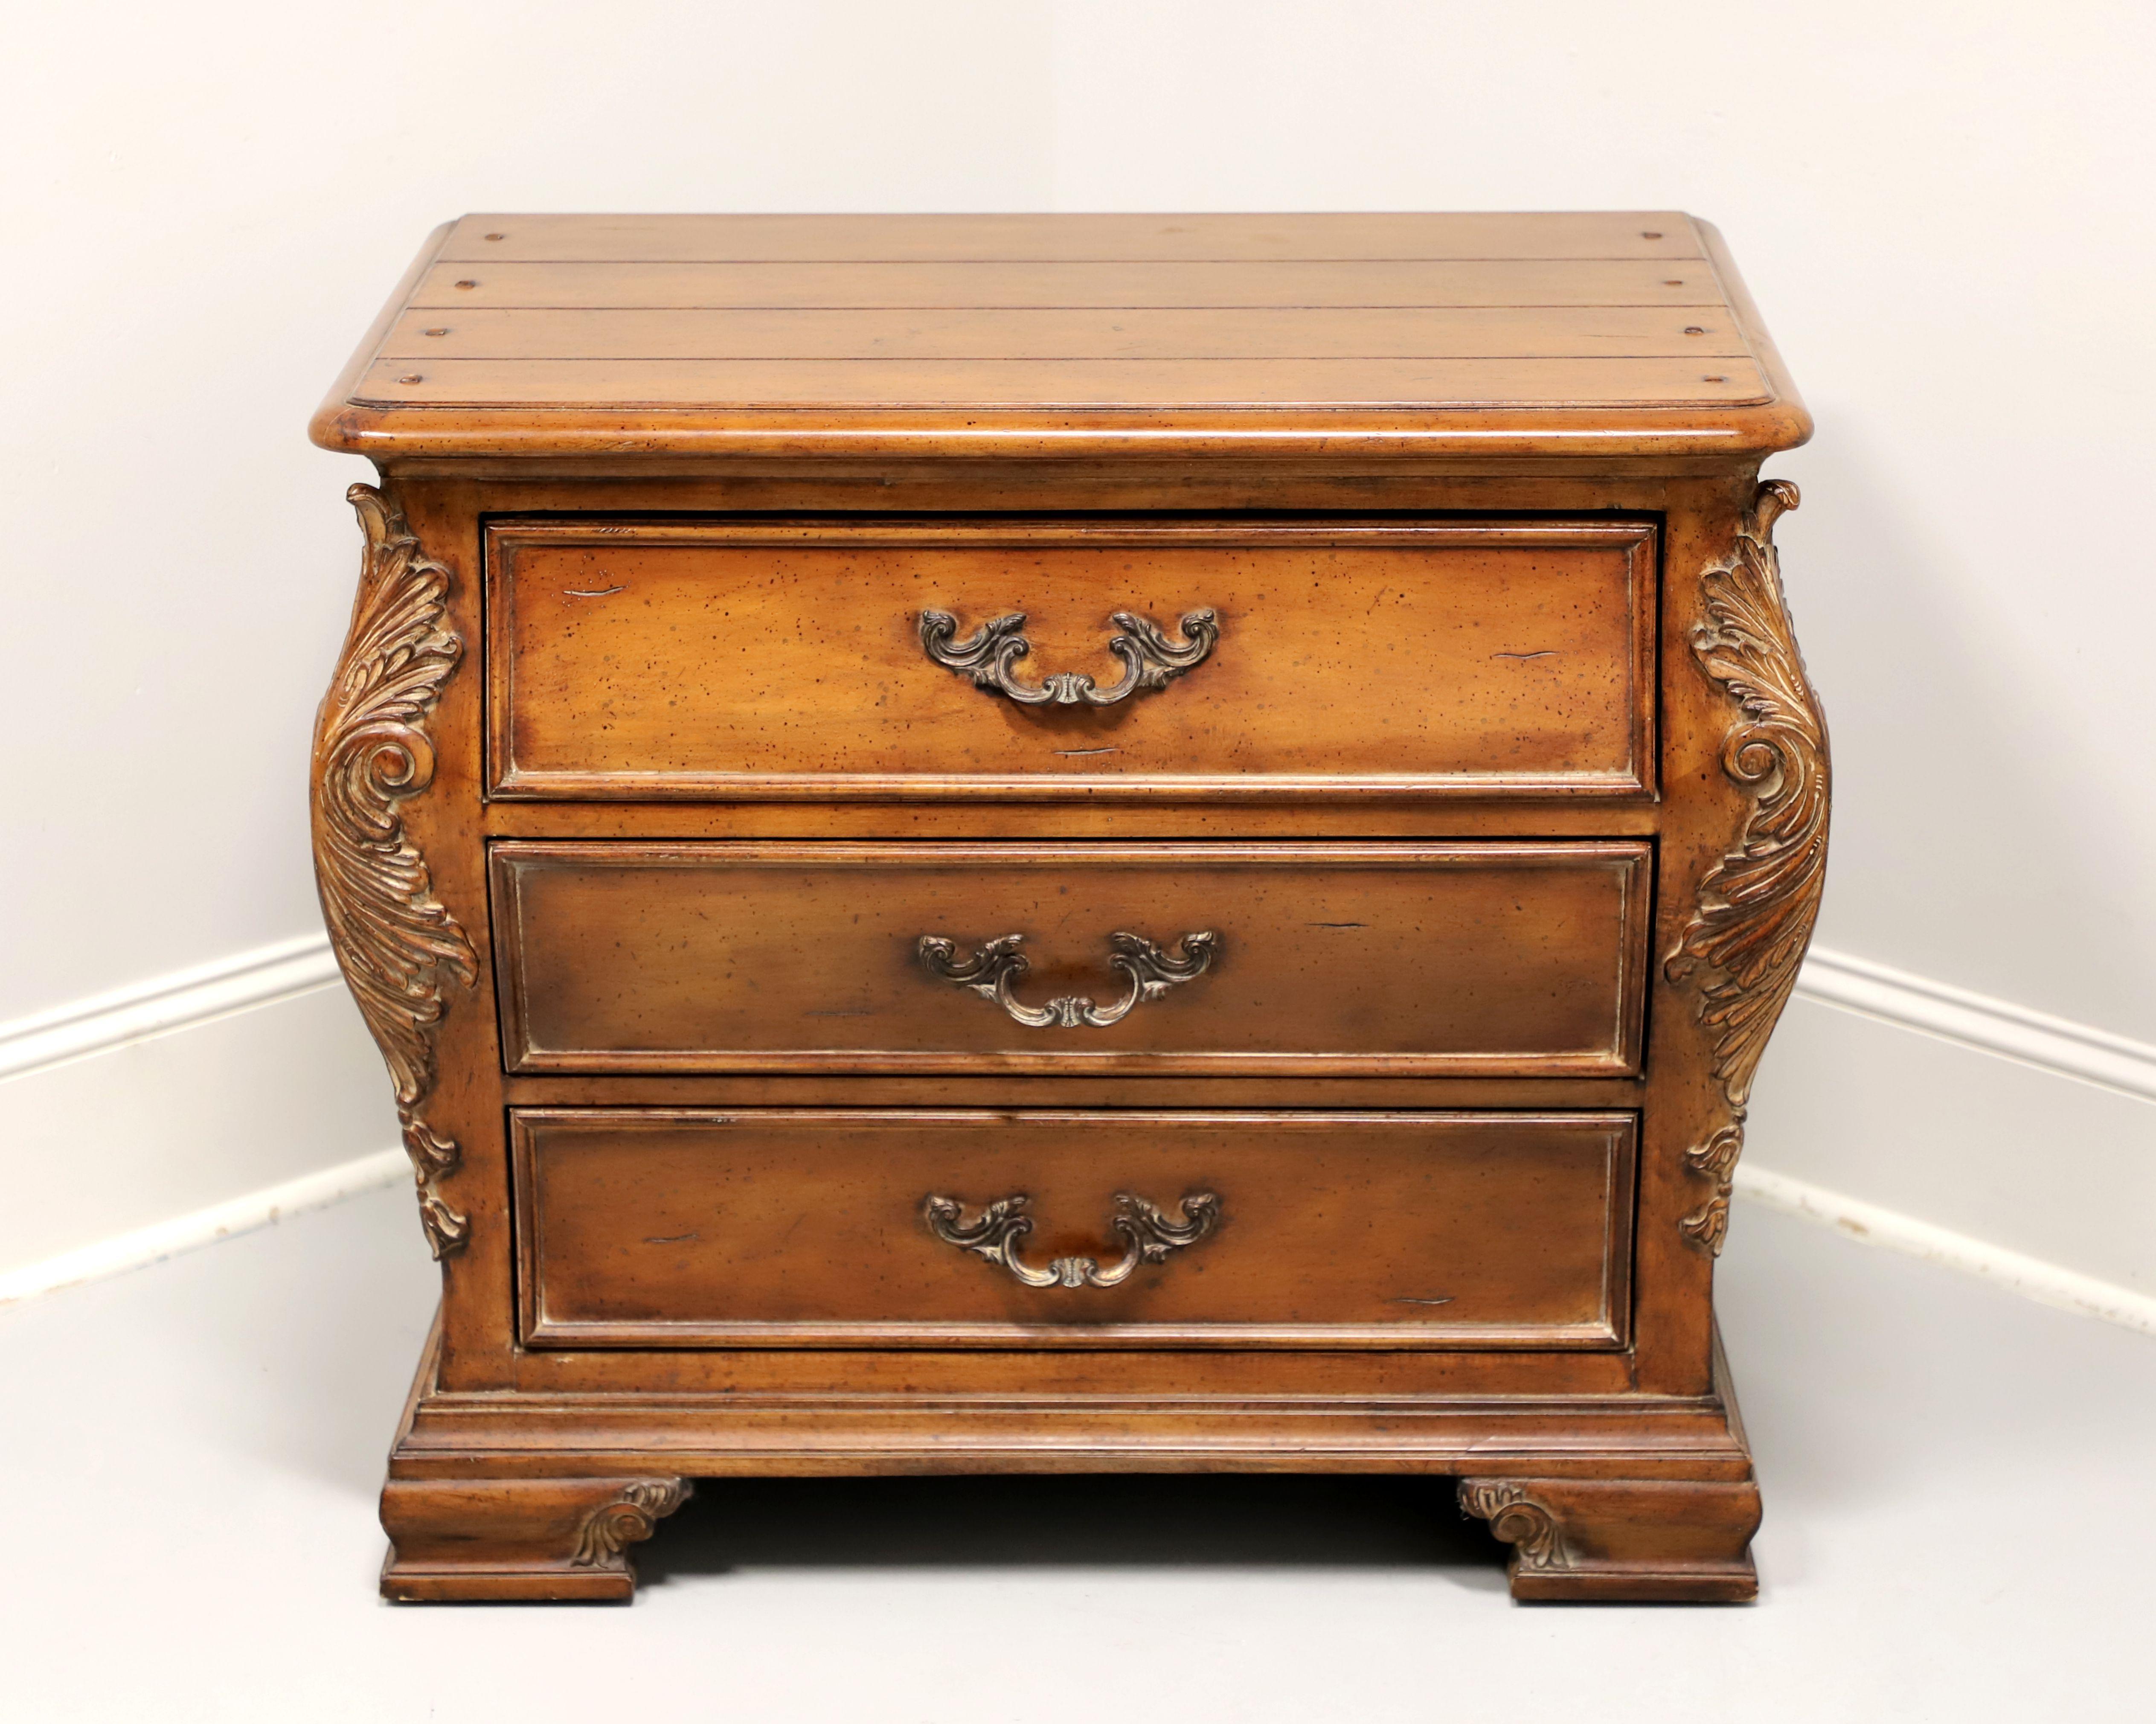 A bedside chest in the French Country style by Thomasville, from their Chateau Provence Collection. Walnut with brass hardware, a slightly distressed finish, plank style top with bullnose edge, decoratively carved contoured sides with acanthus